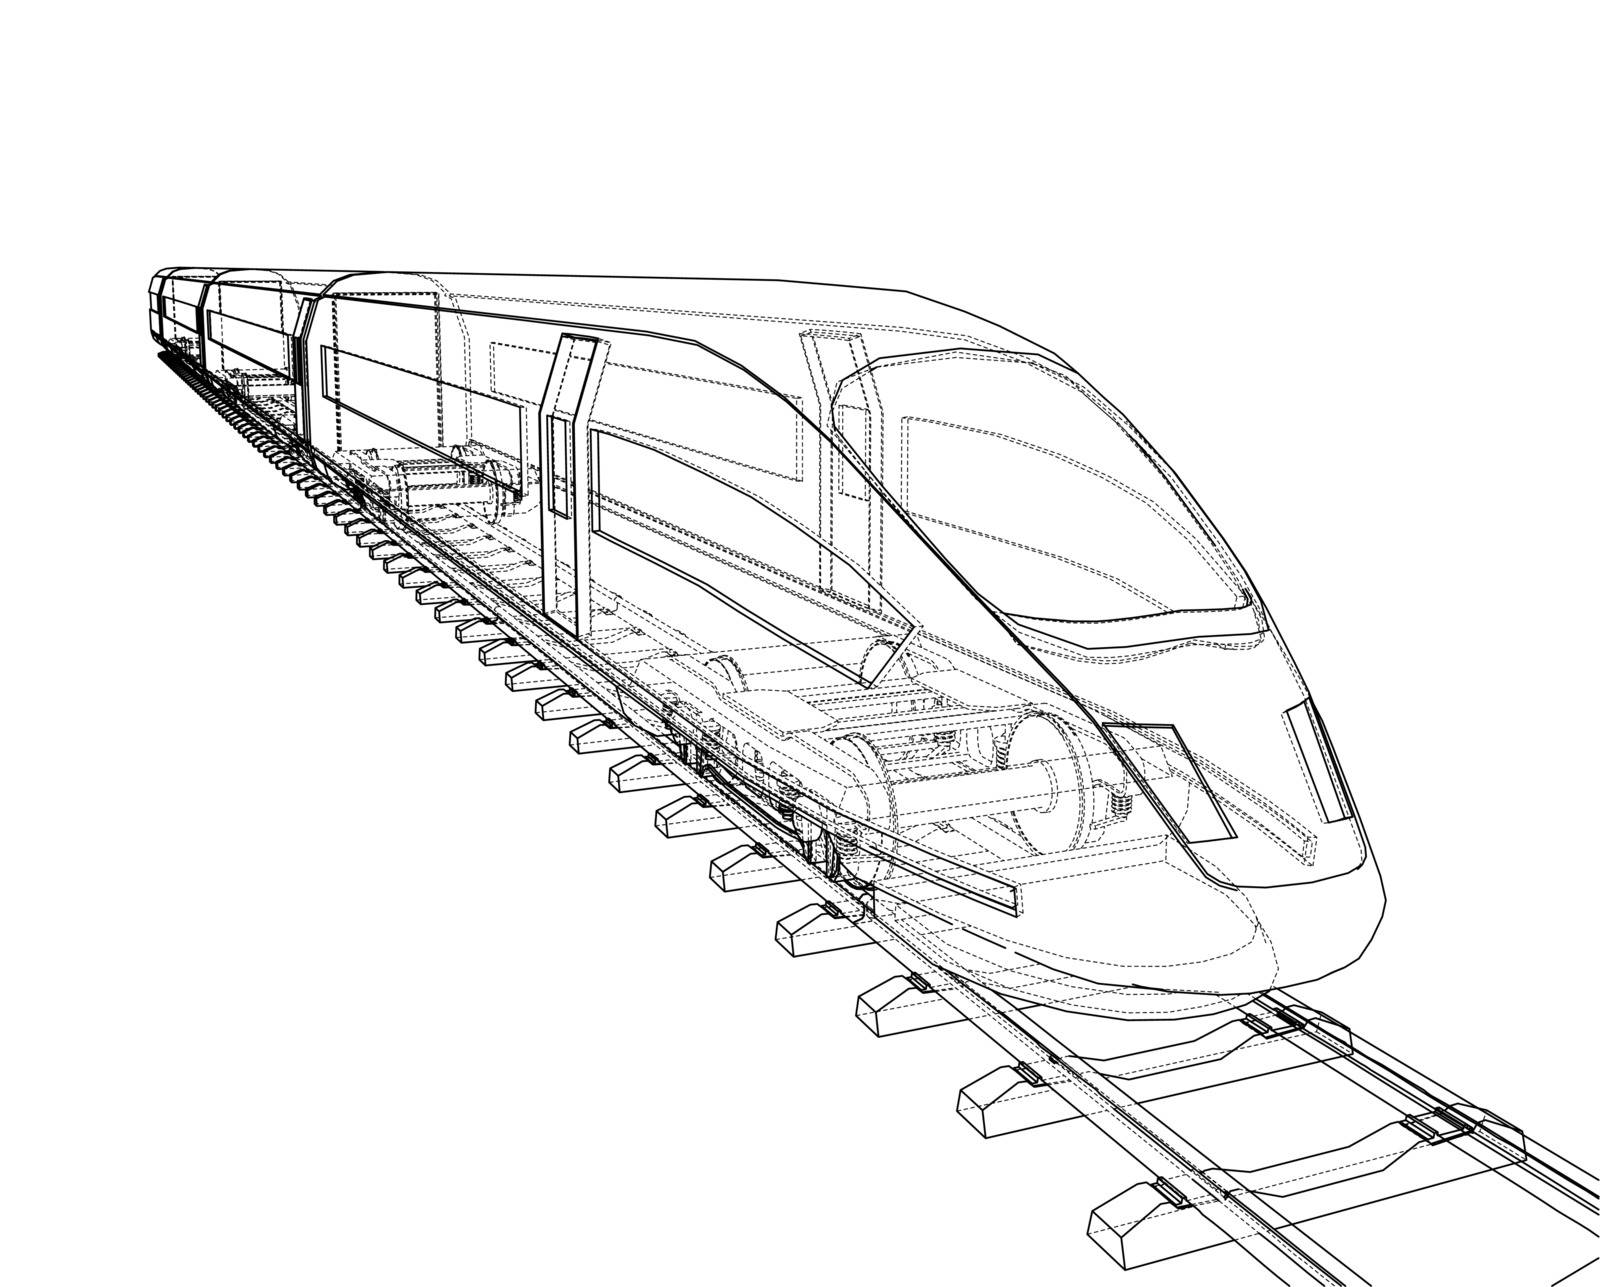 Modern speed train concept. Vector rendering of 3d. Wire-frame style